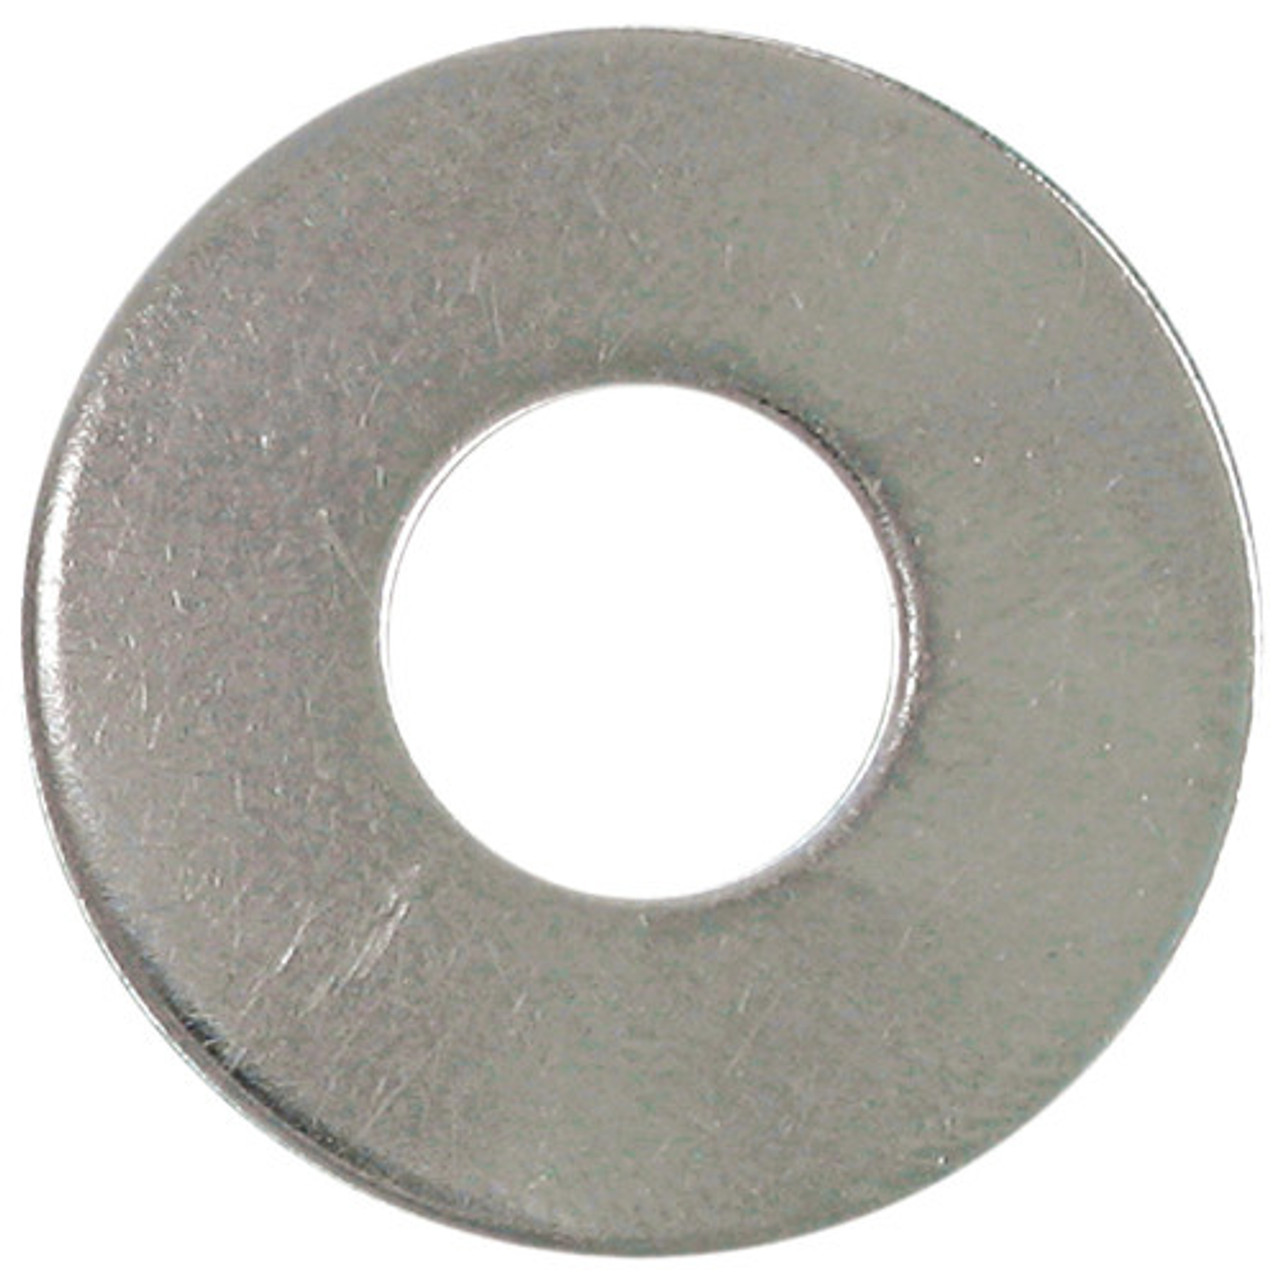 9/16" Zinc Plated Spacer Washer 100 Pc.   162-923